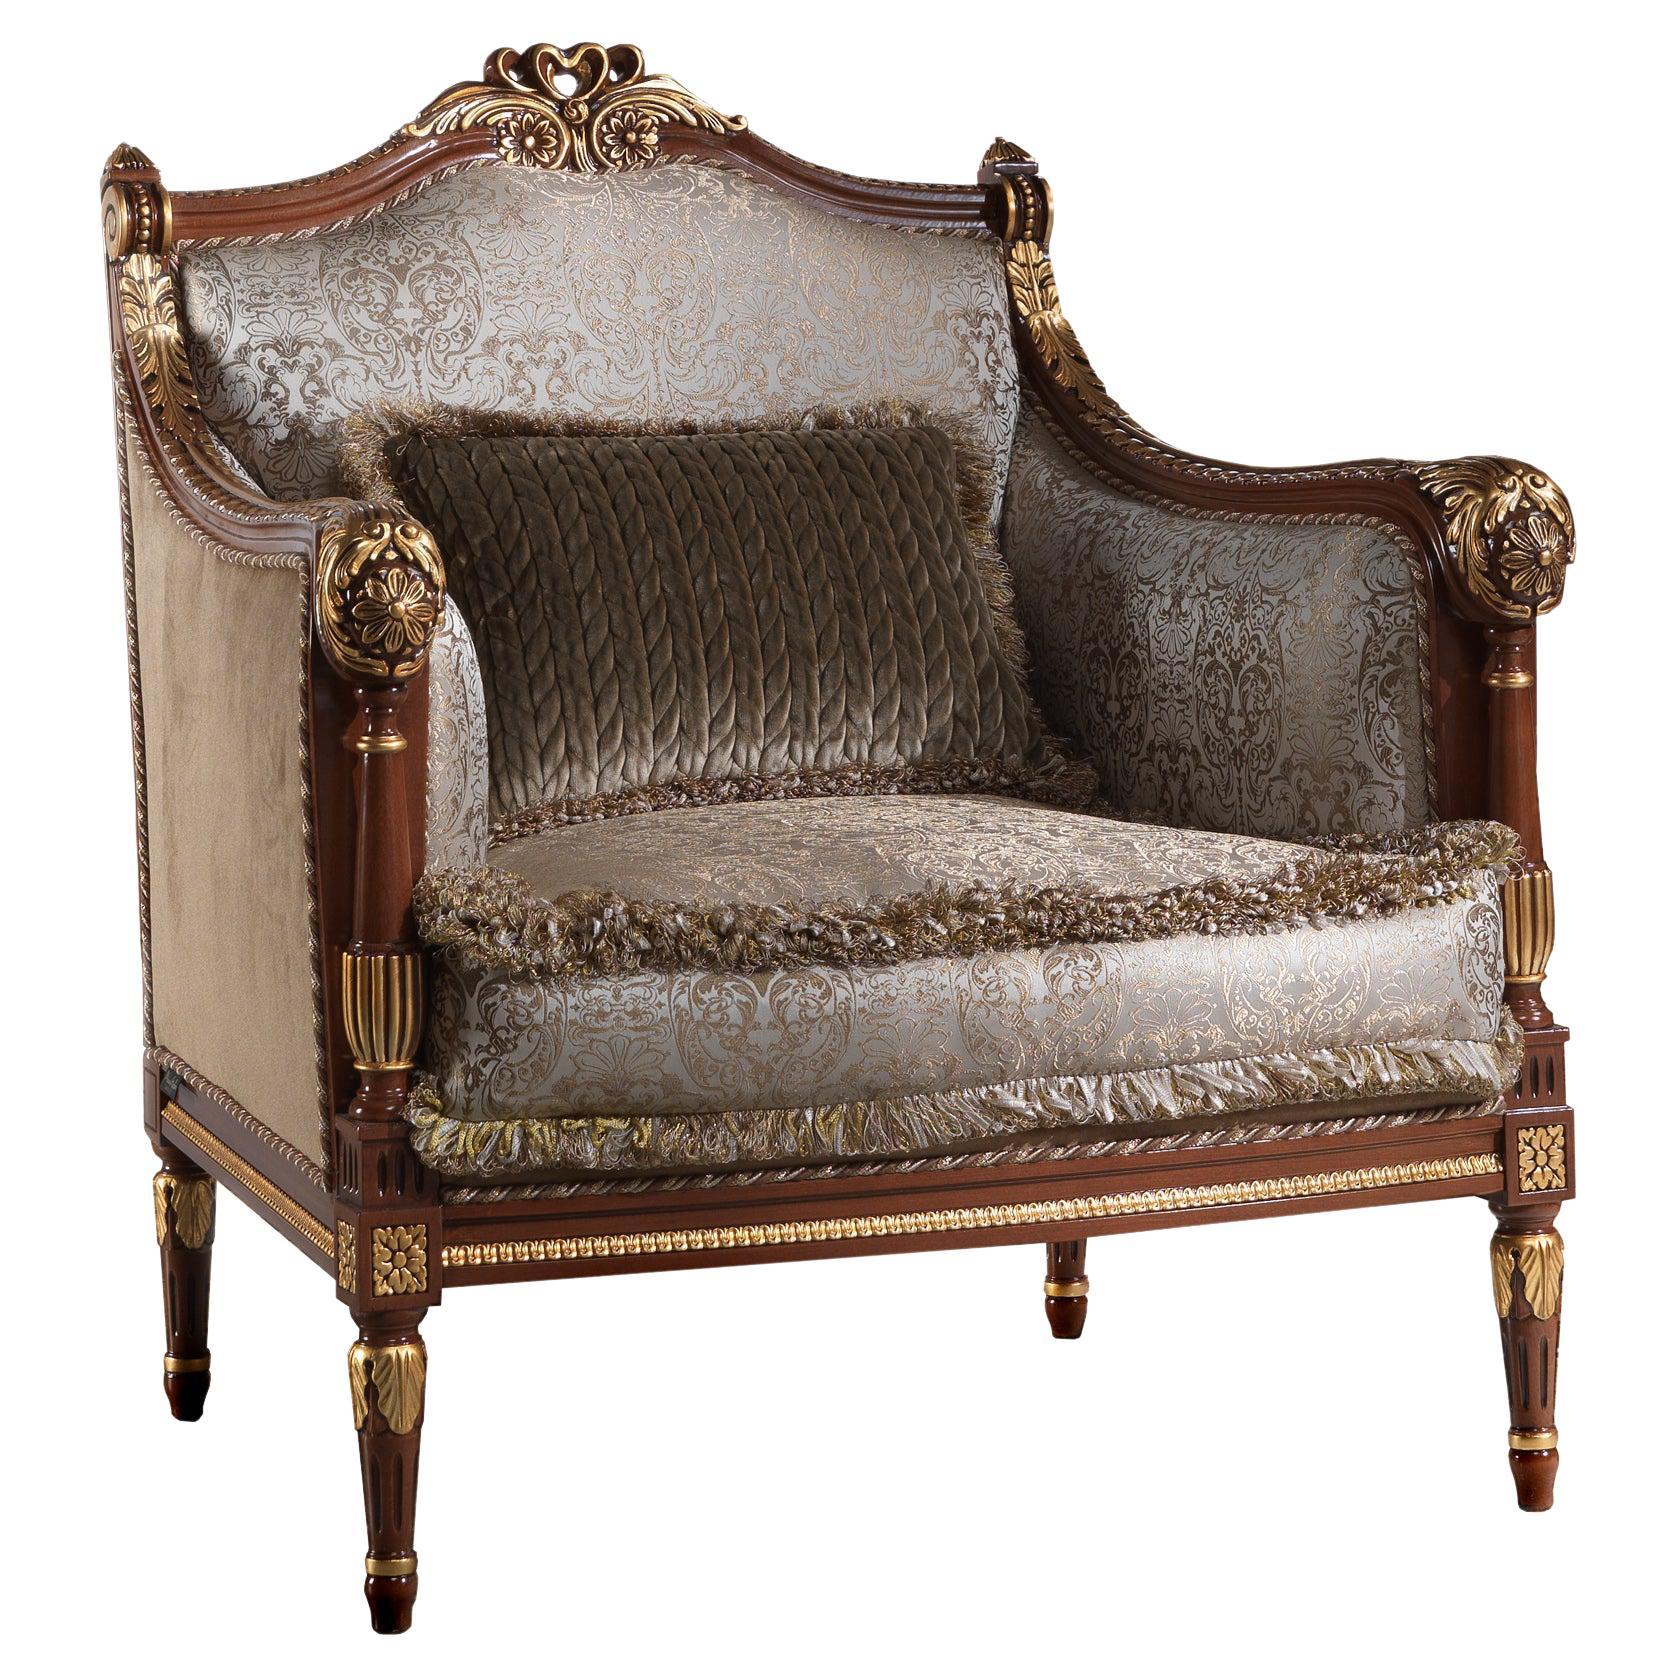 Empire-Style Italian Armchair with Cushion in Walnut and Gold Leaf Finish